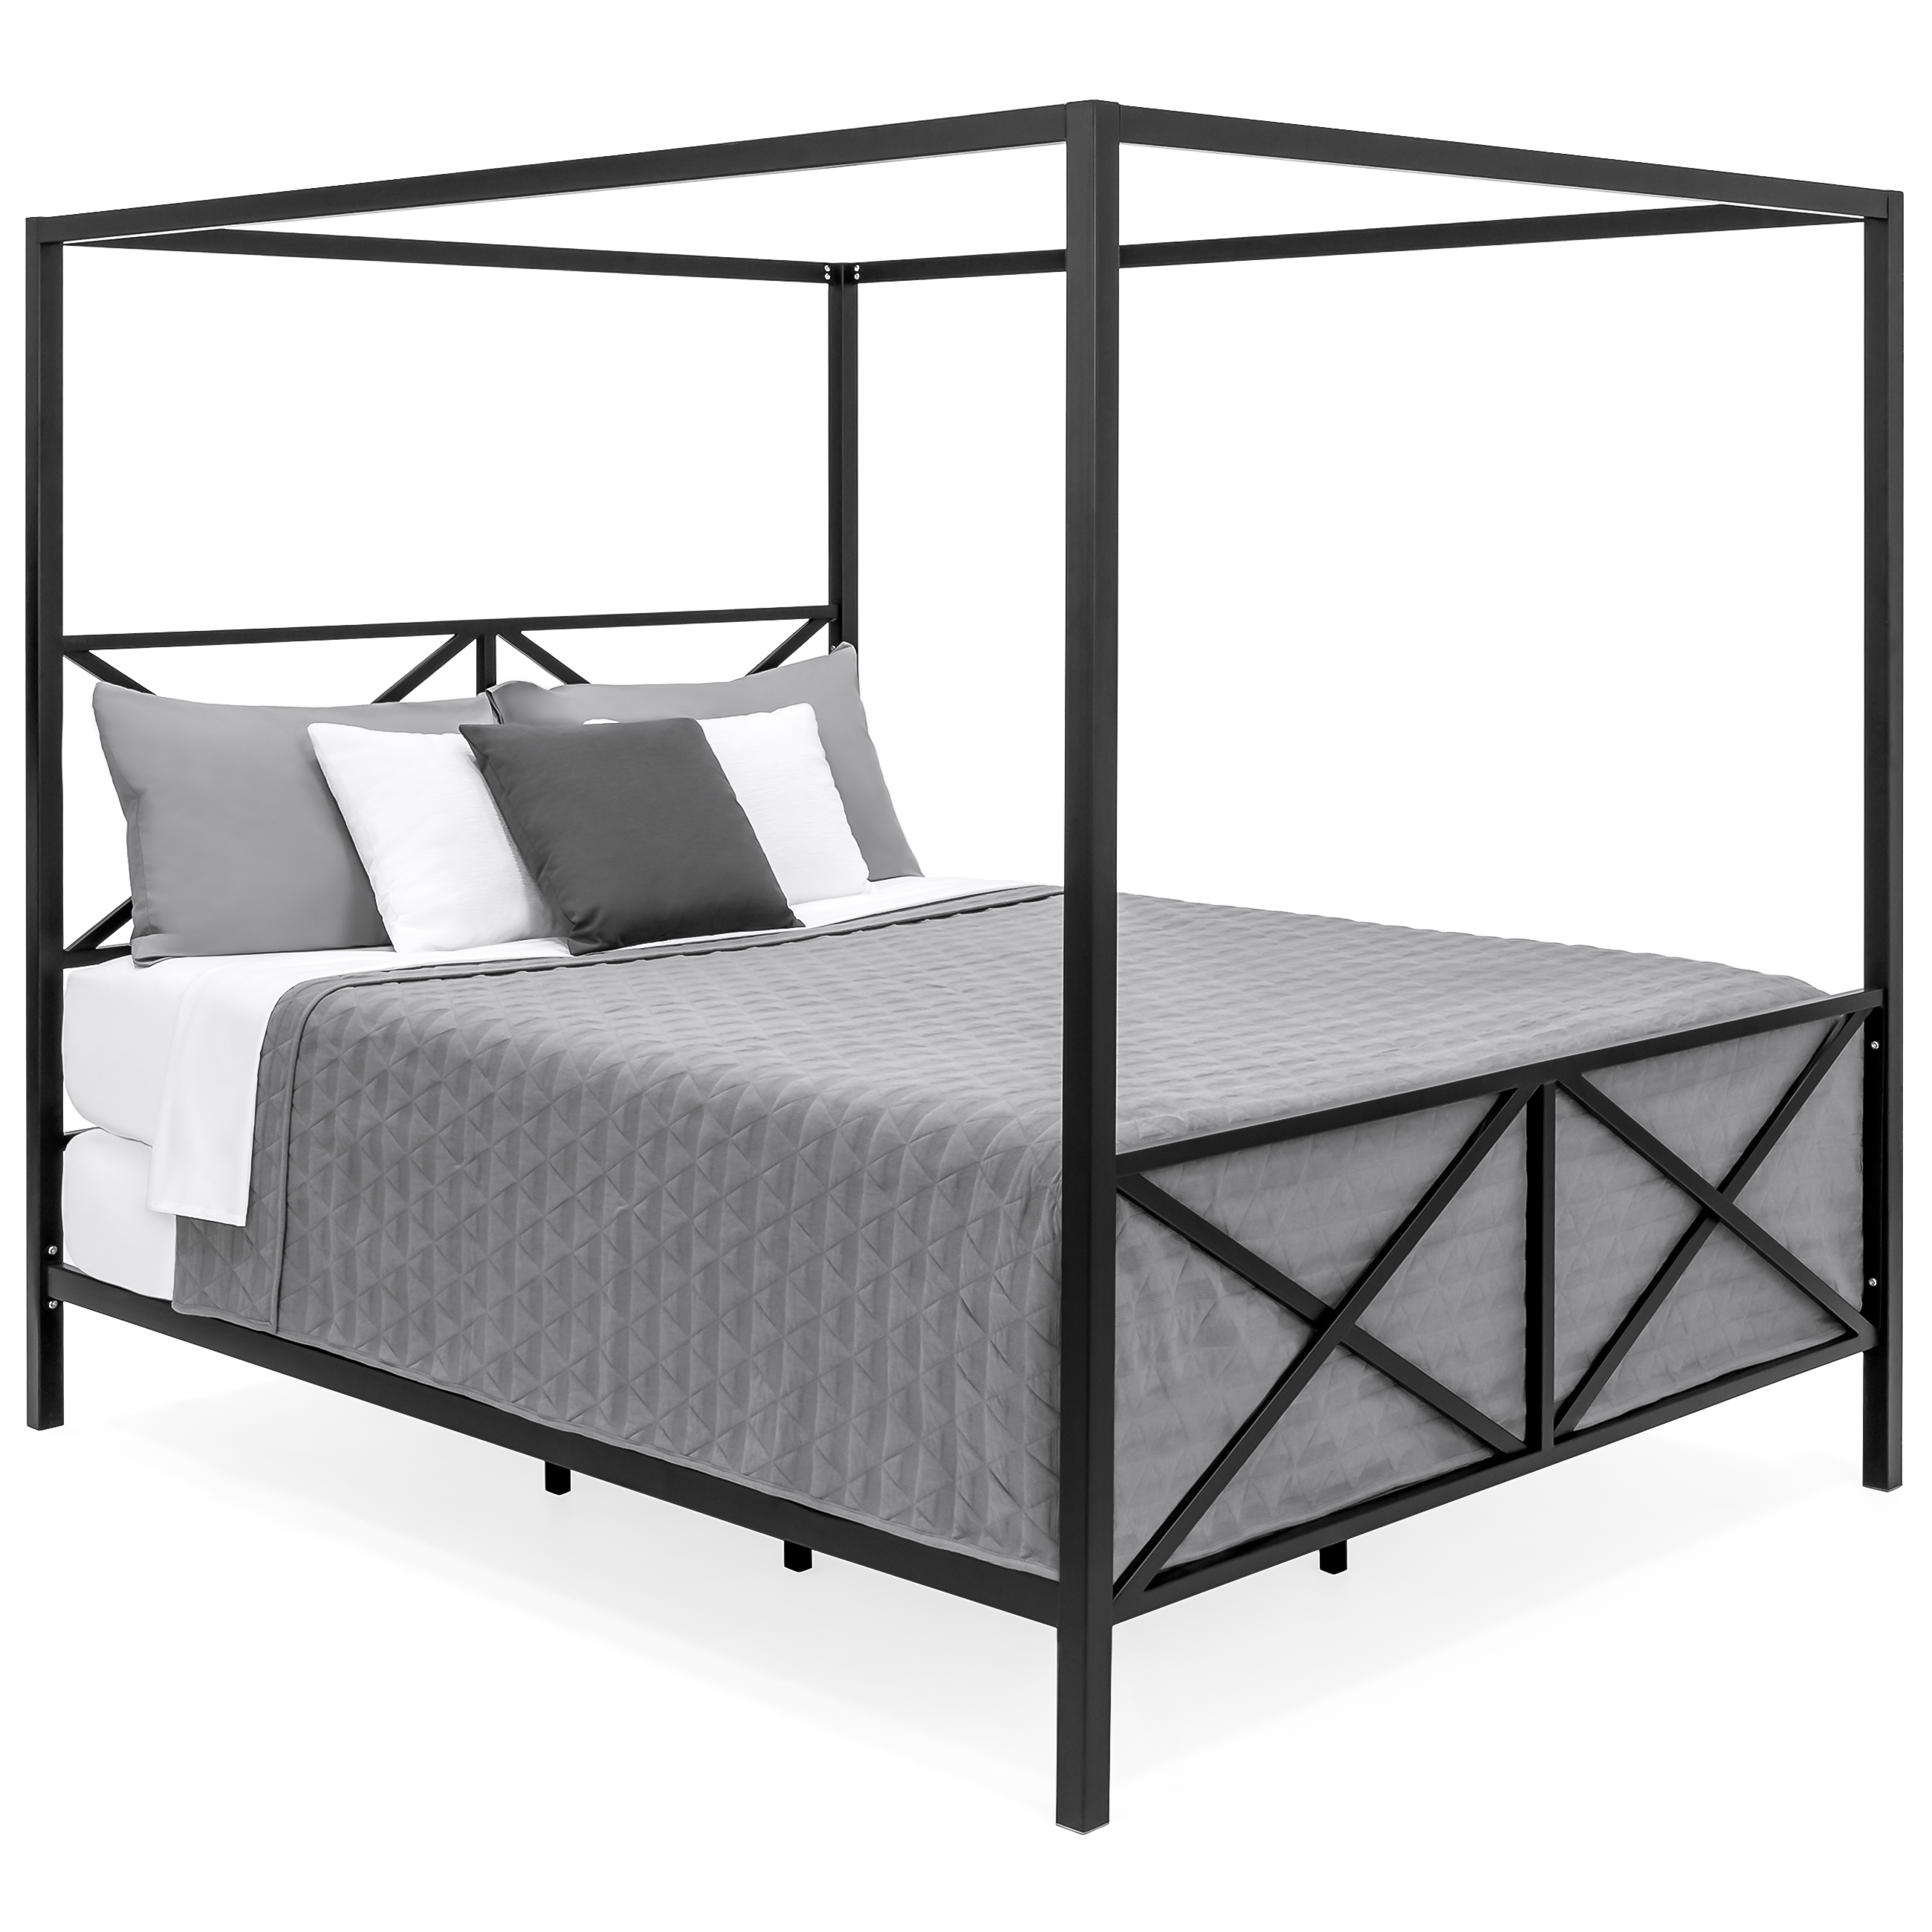 Best Choice Products Modern 4 Post Canopy Queen Bed w/ Metal Frame